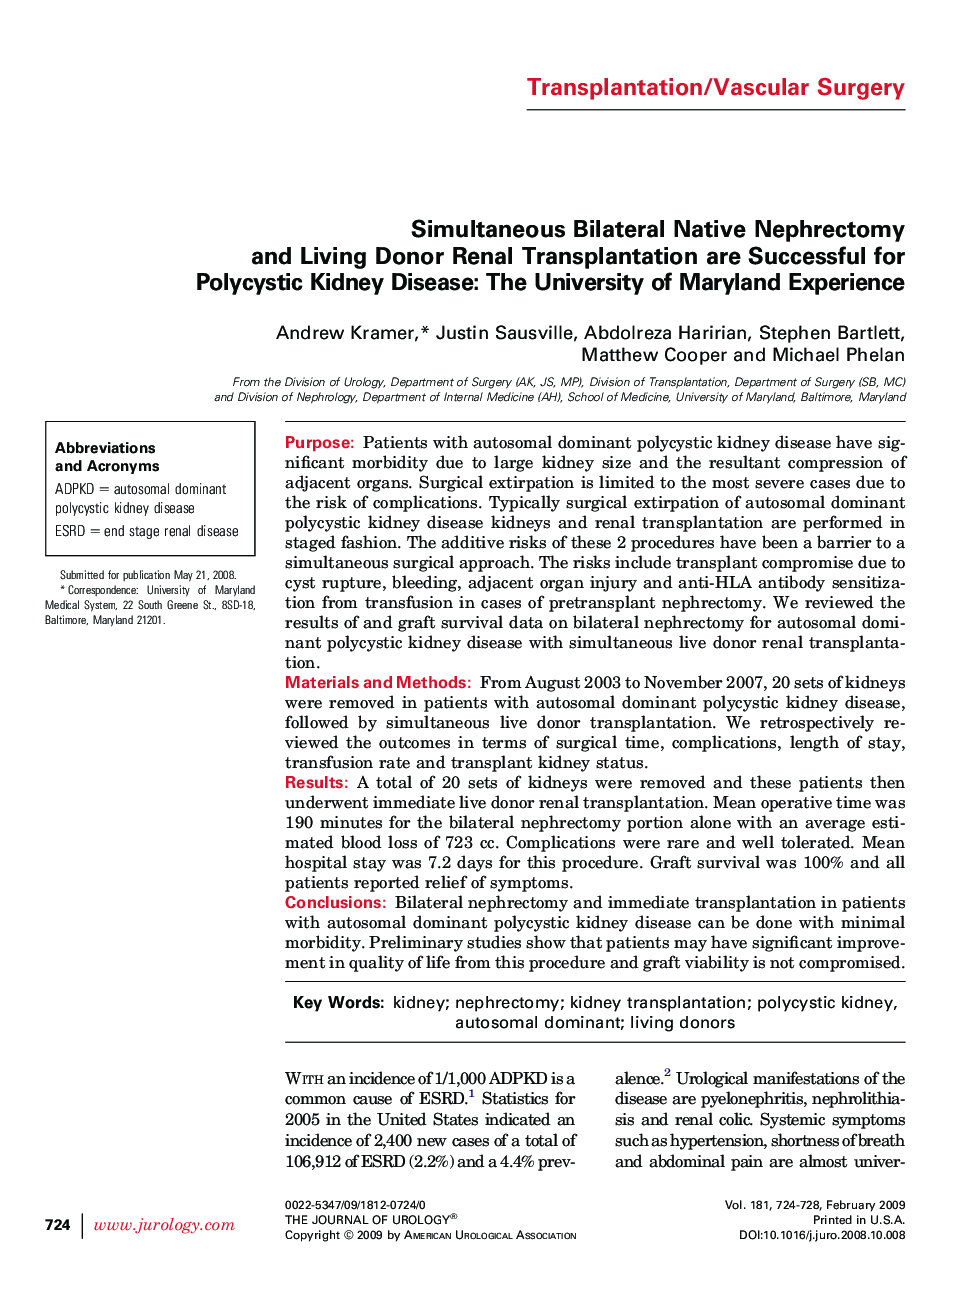 Simultaneous Bilateral Native Nephrectomy and Living Donor Renal Transplantation are Successful for Polycystic Kidney Disease: The University of Maryland Experience